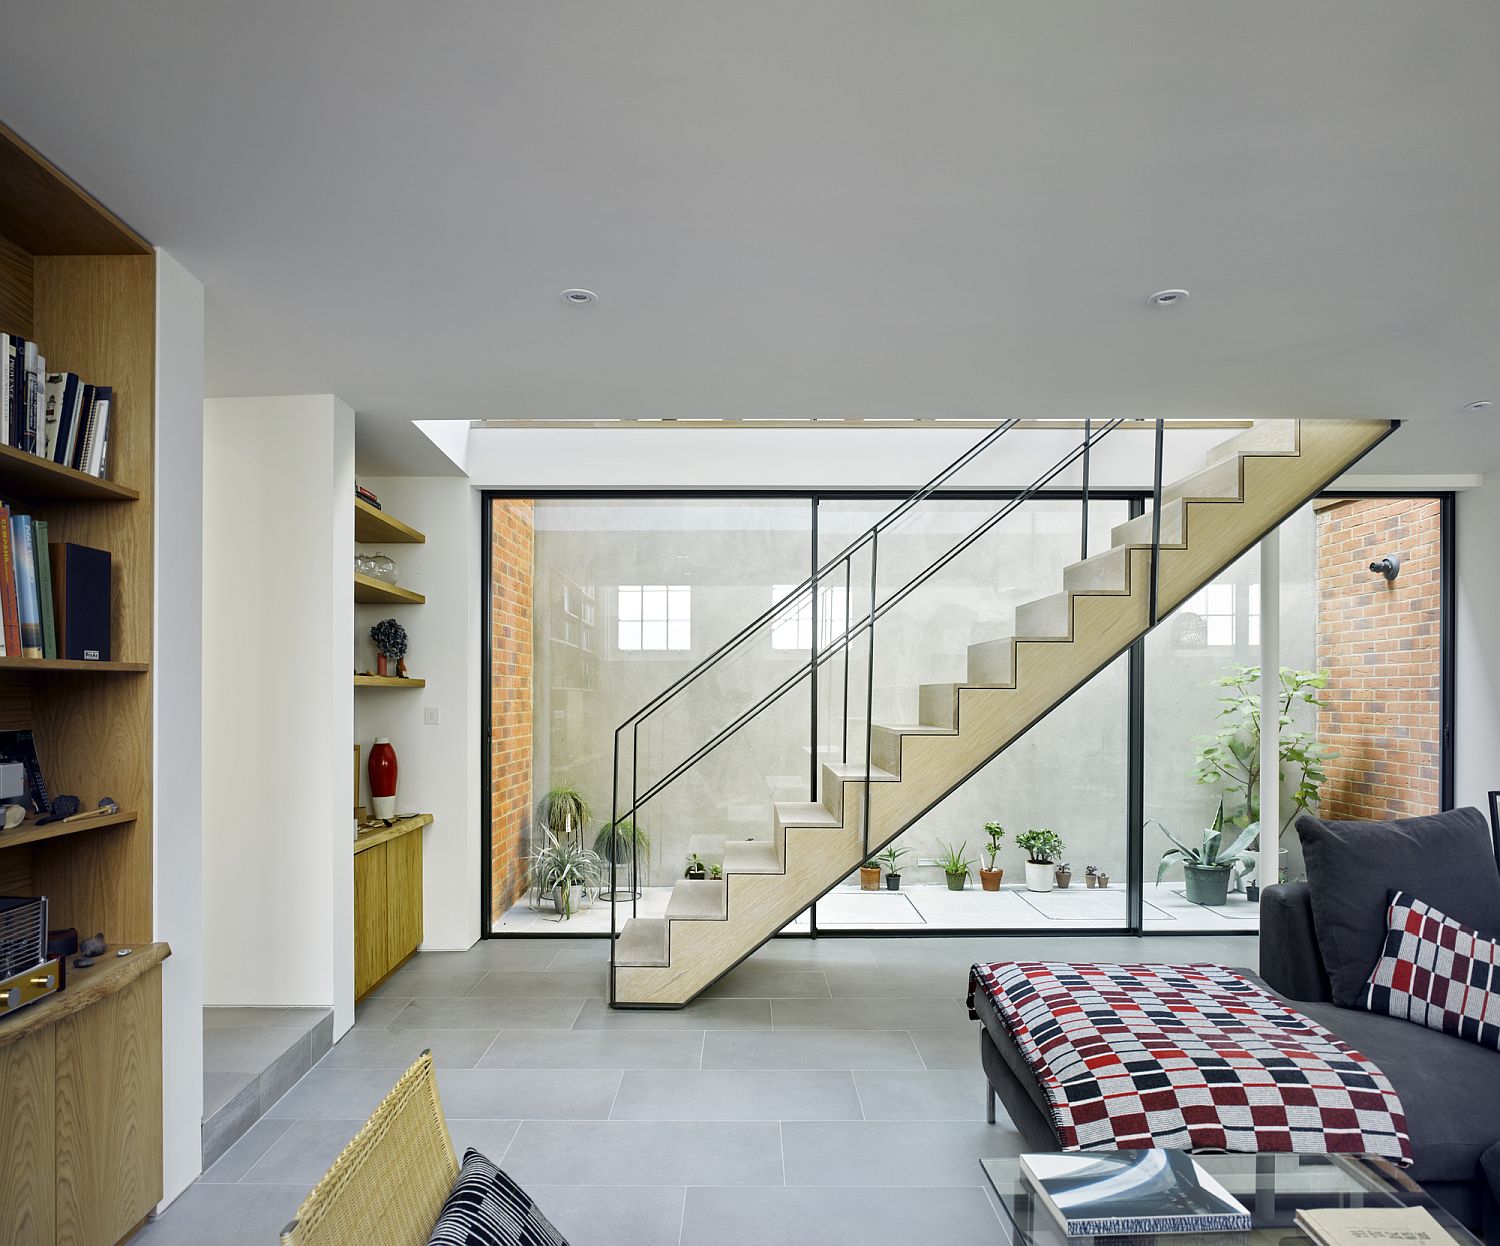 Renovated-house-finds-new-space-with-an-excavation-that-adds-living-areas-and-bedrooms